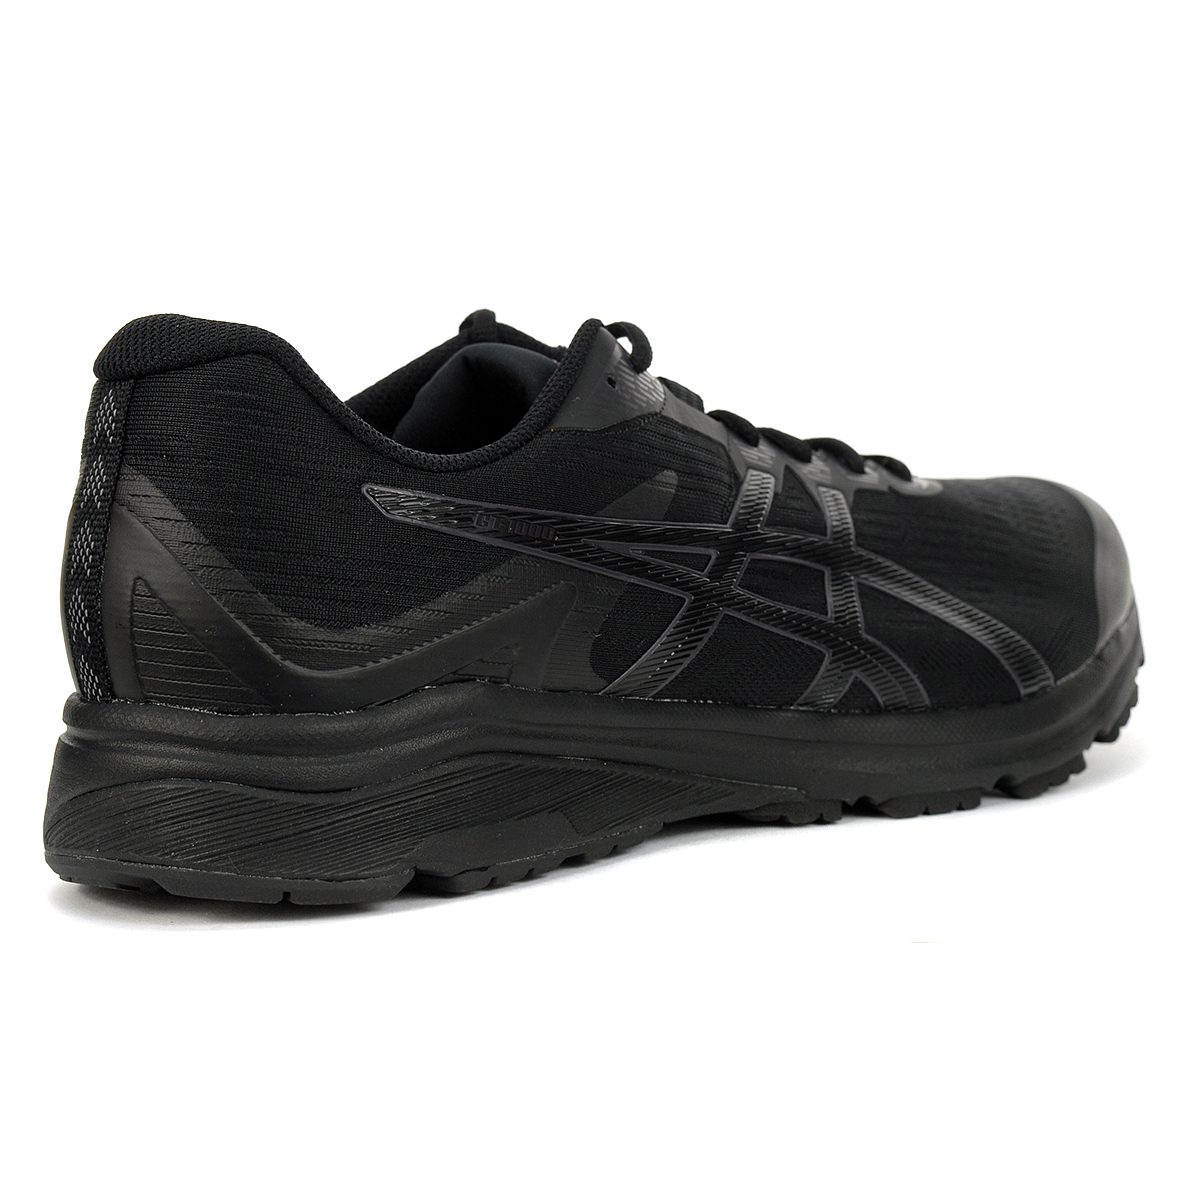 ASICS Men's GT-1000 8 (Extra Wide) Black Running Shoes 1011A539.002 ...